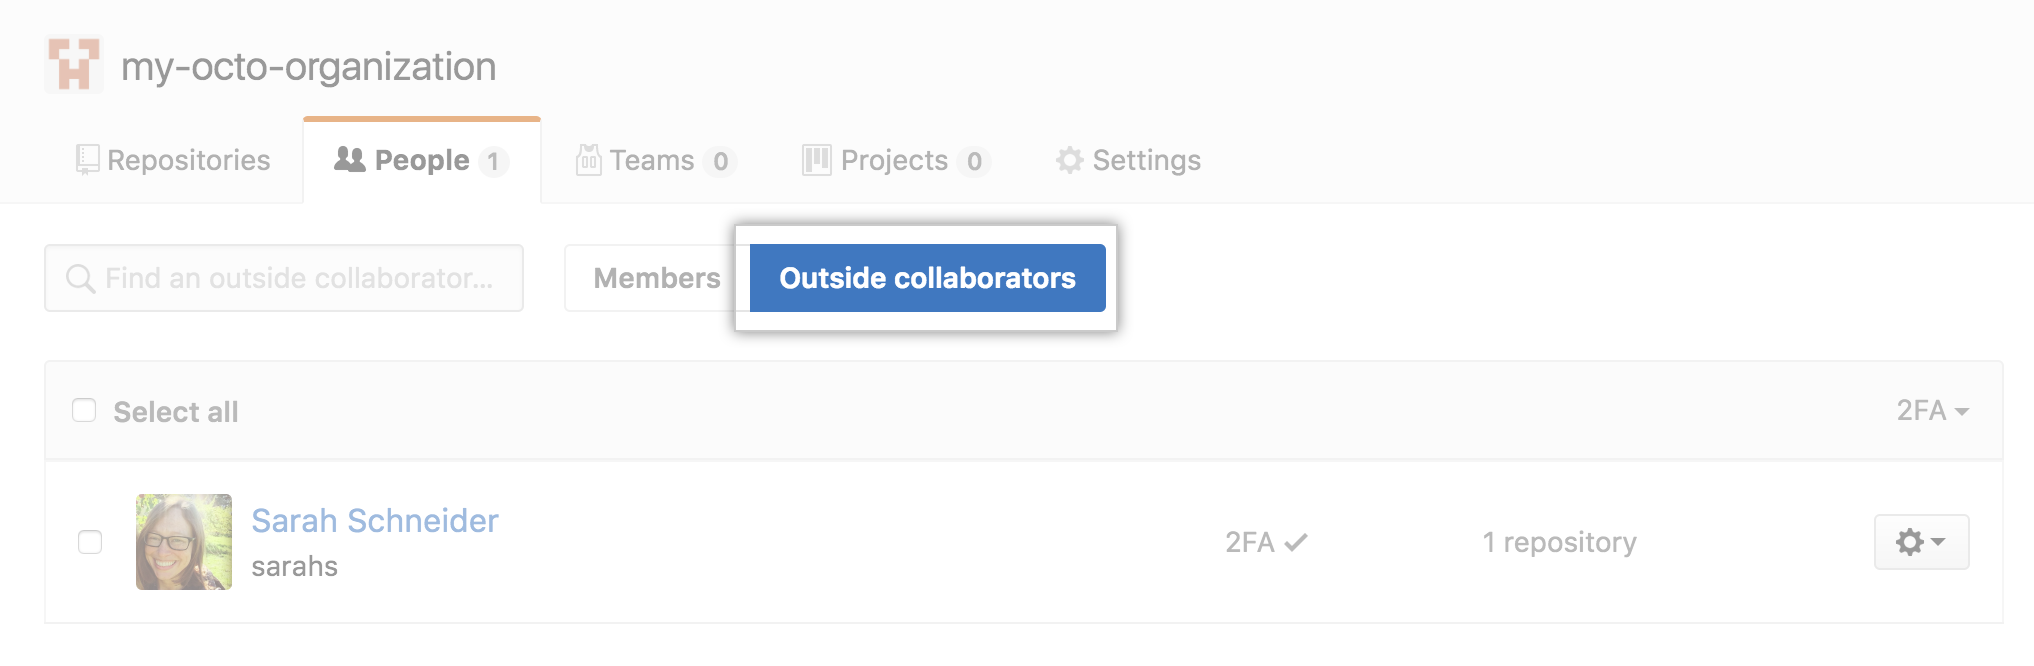 Button to invite members or outside collaborators to an organization